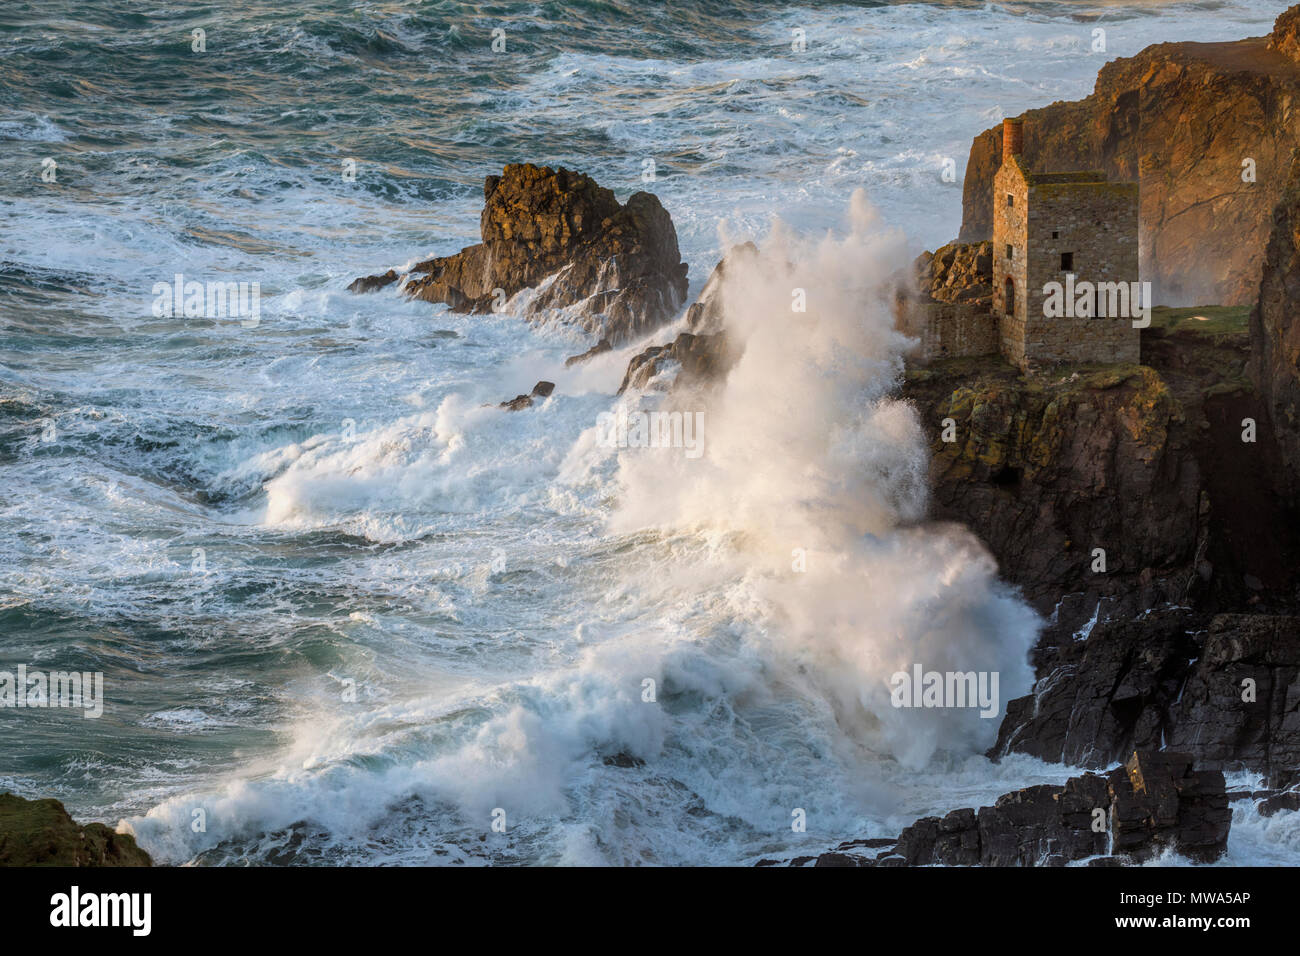 The Crown Mines at Botallack in Cornwall. Stock Photo